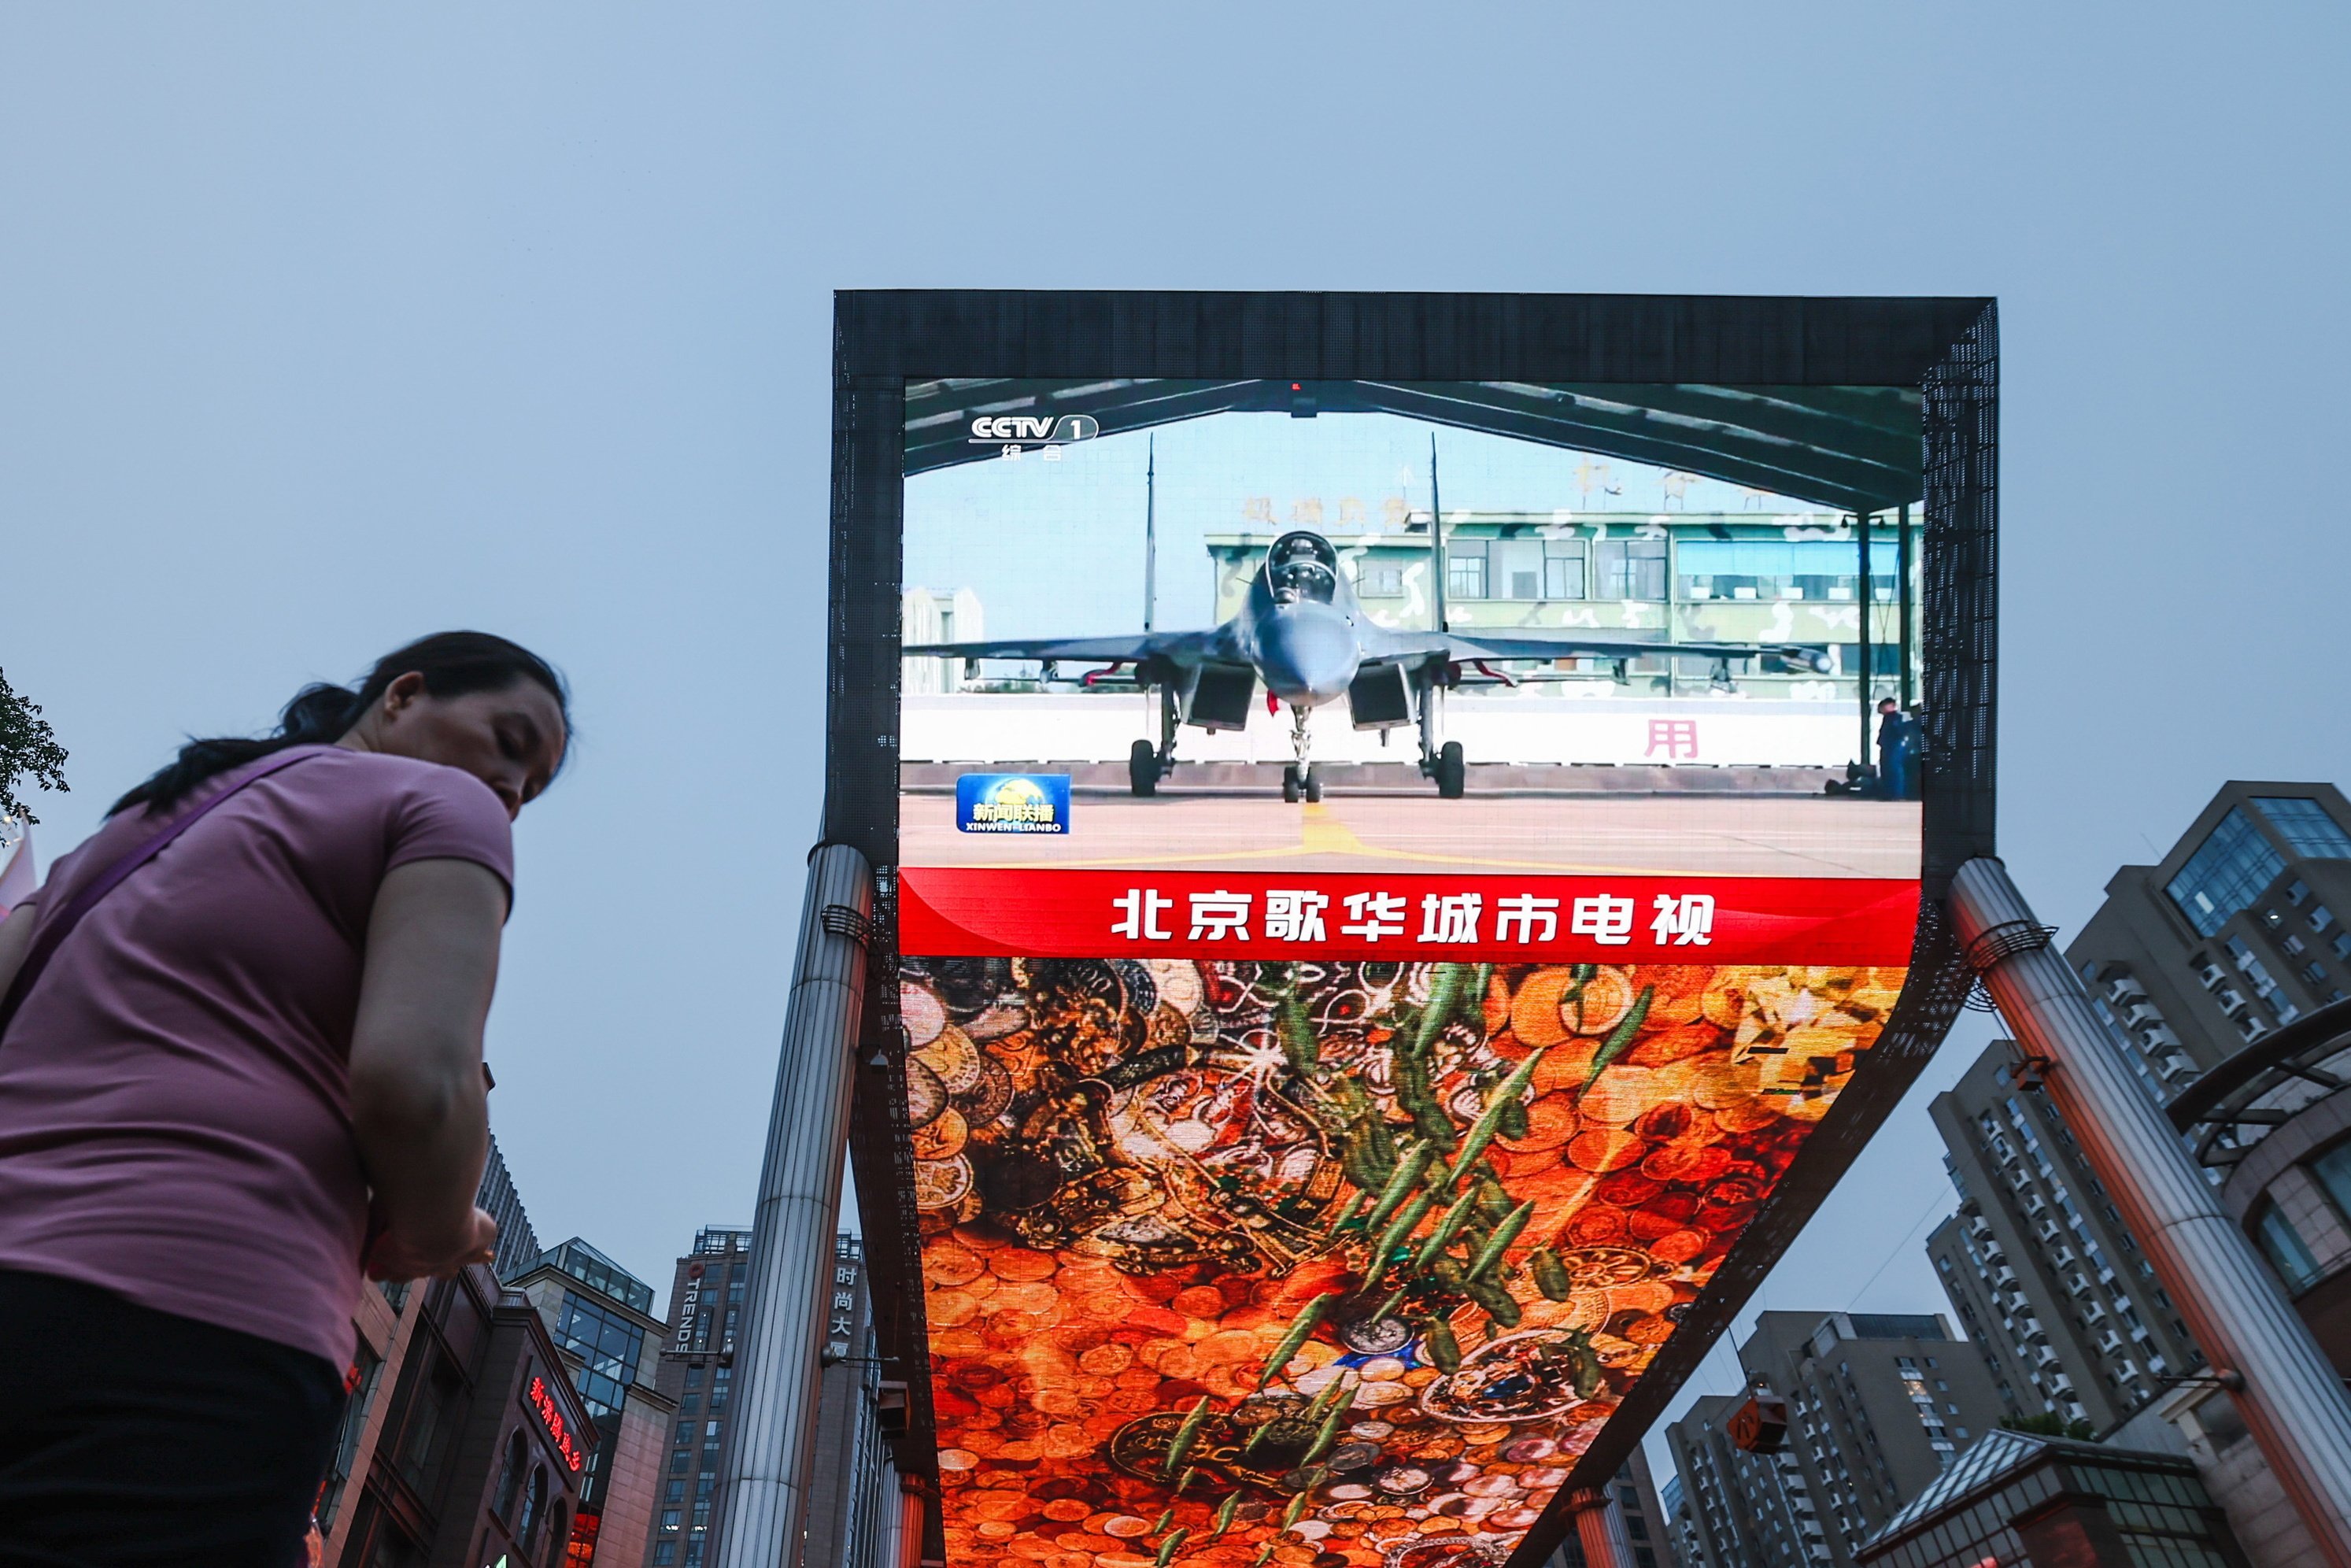 A large outdoor television screen in Beijing broadcasts news of mainland China’s military drills conducted around Taiwan on Thursday. Photo: EPA-EFE